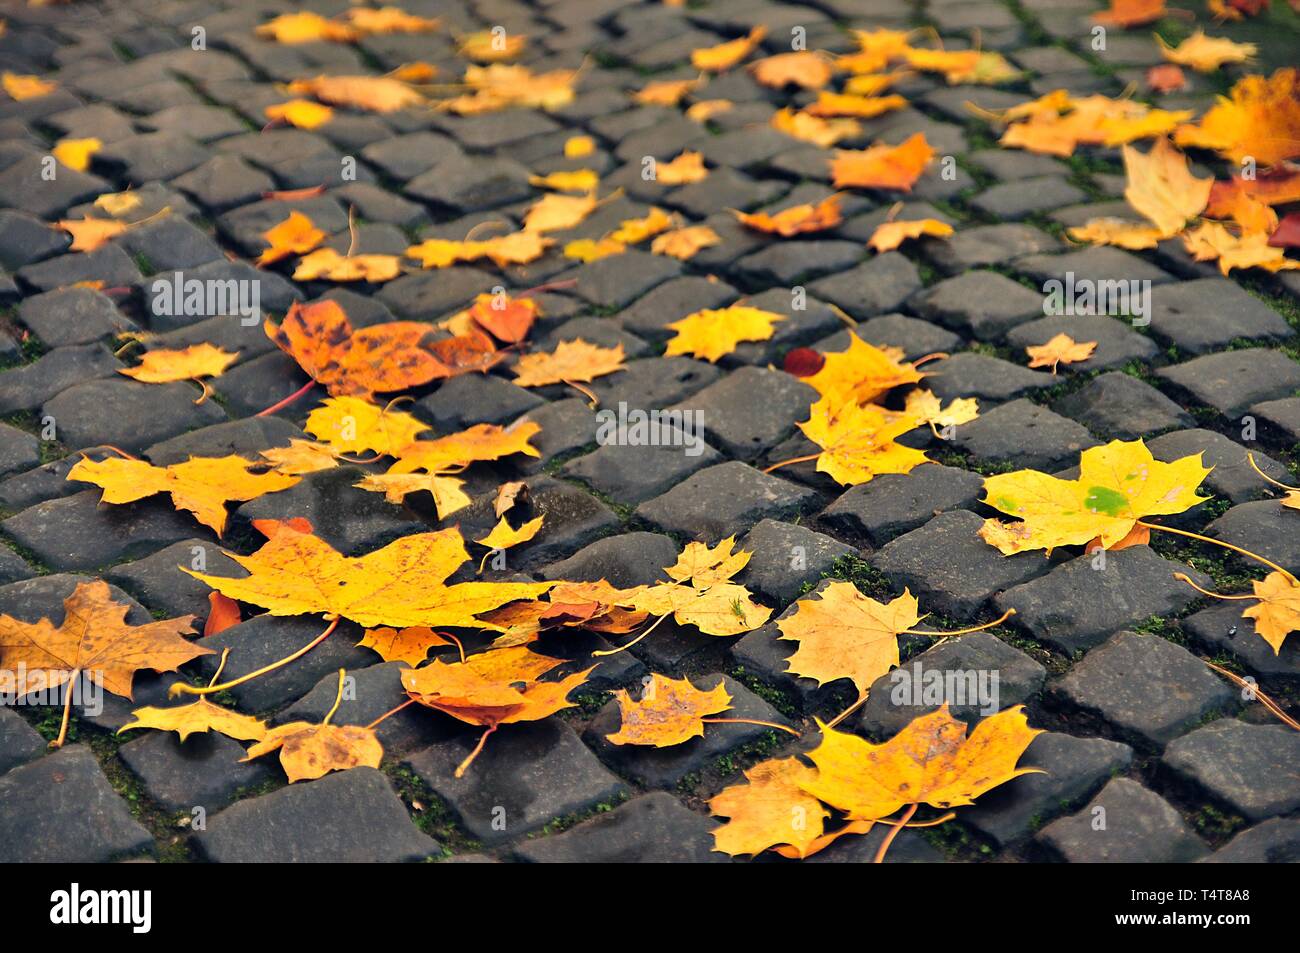 Autumn leaves on the floor, maple leaves (Acer spec.), Autumnal leaf fall, leaves in autumn colors Stock Photo